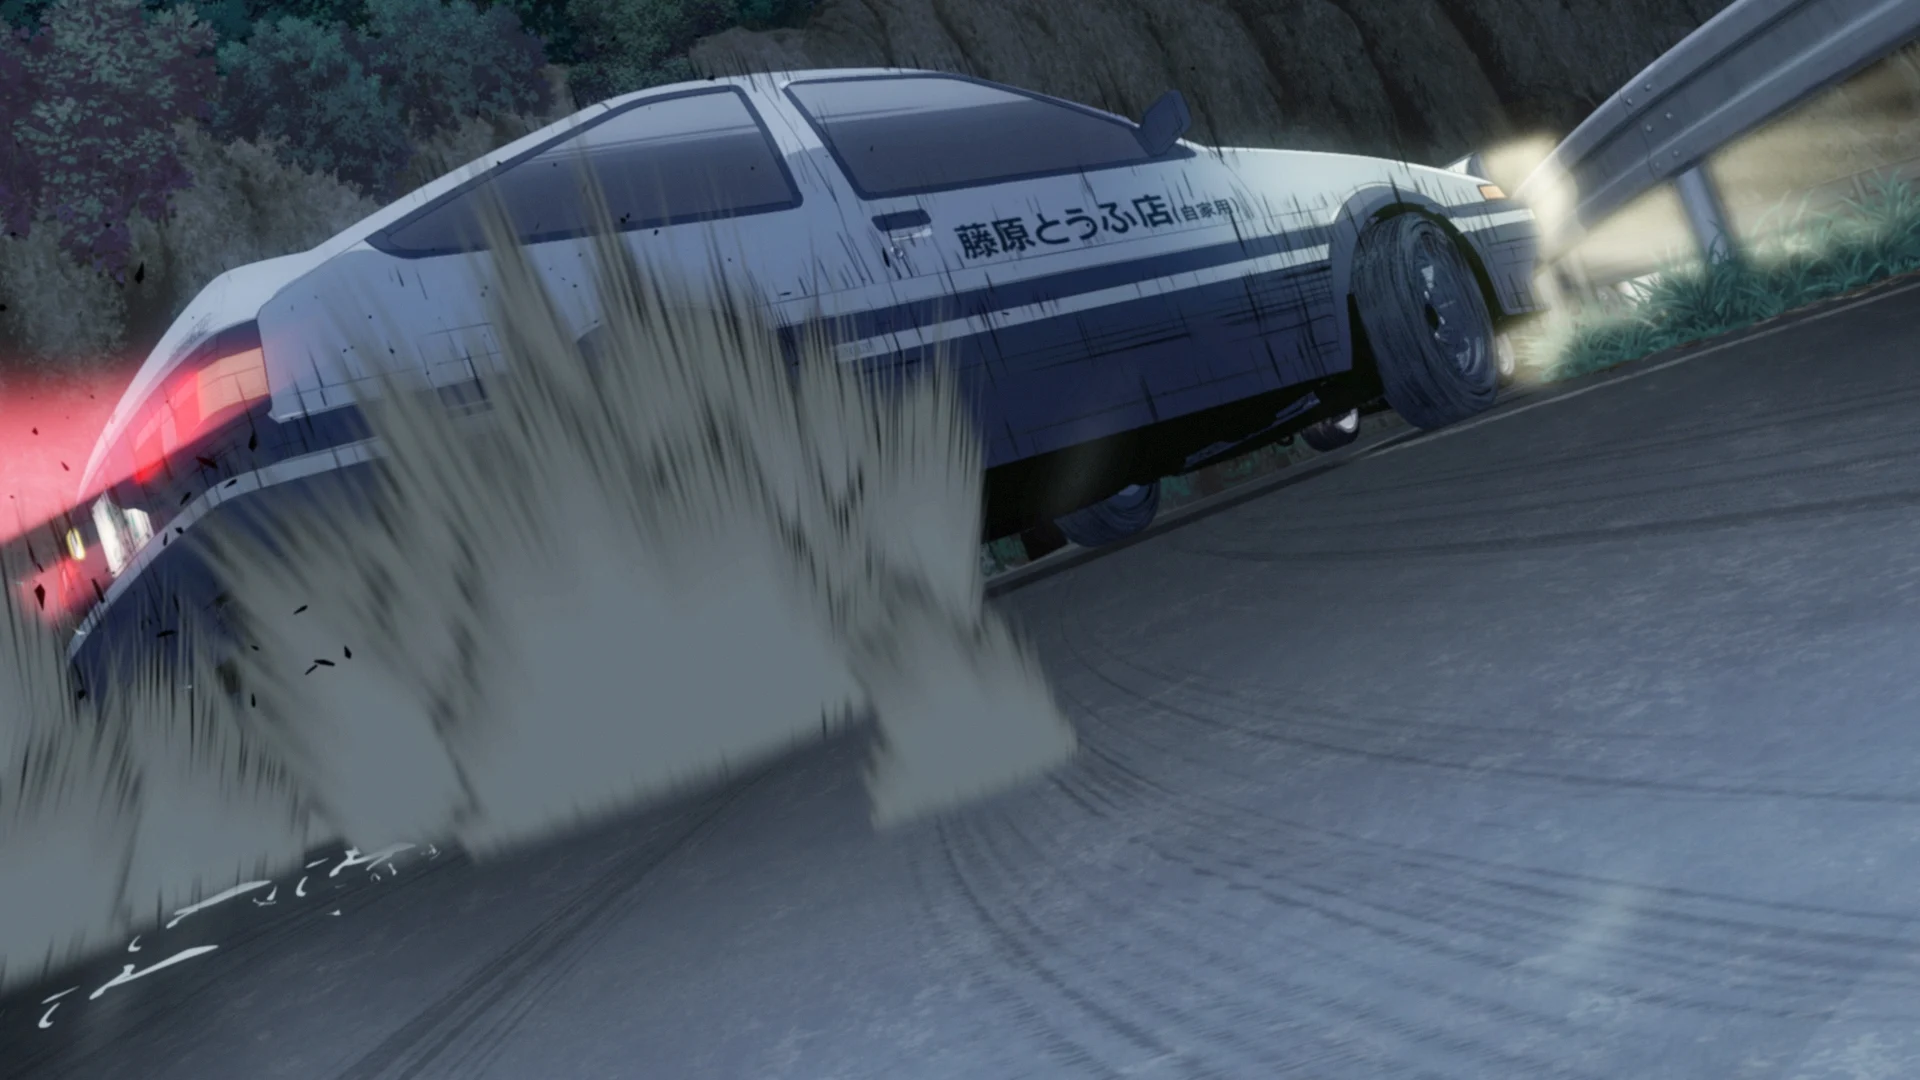 The 3rd New Initial D movie is a blast as it includes a race between the drivers, who have amazing driving techniques.